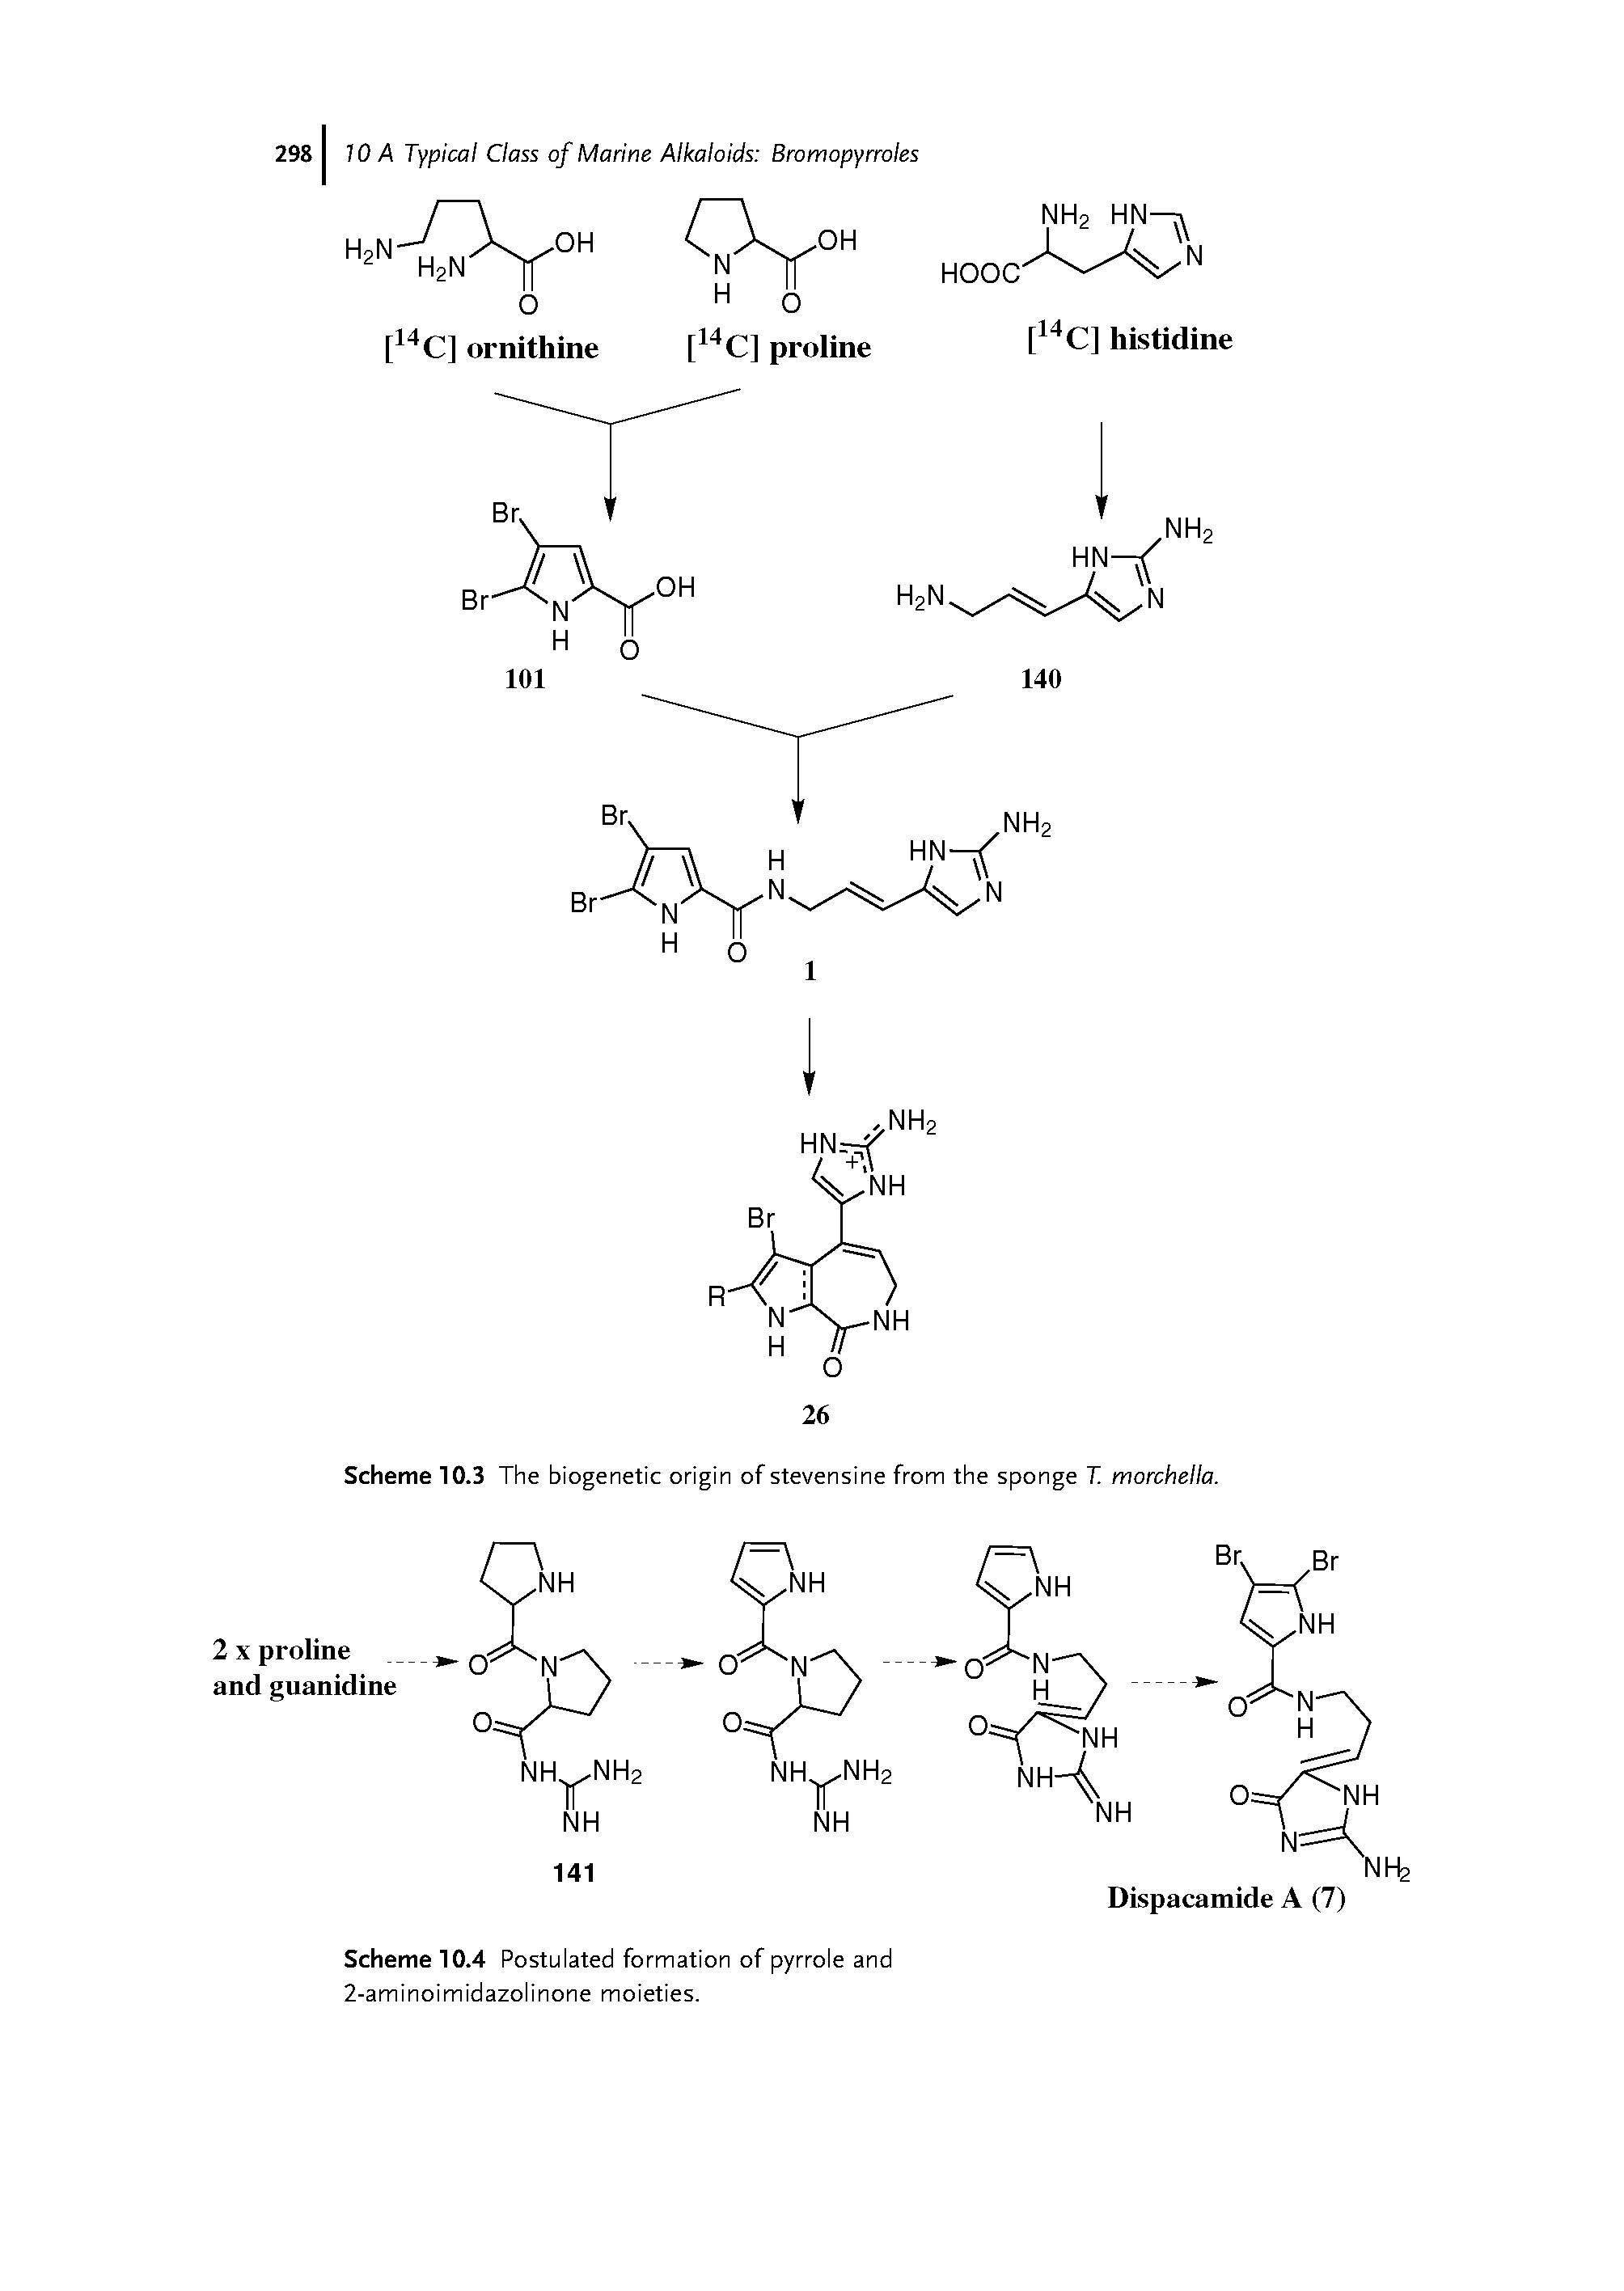 Scheme 10.4 Postulated formation of pyrrole and 2-aminoimidazolinone moieties.